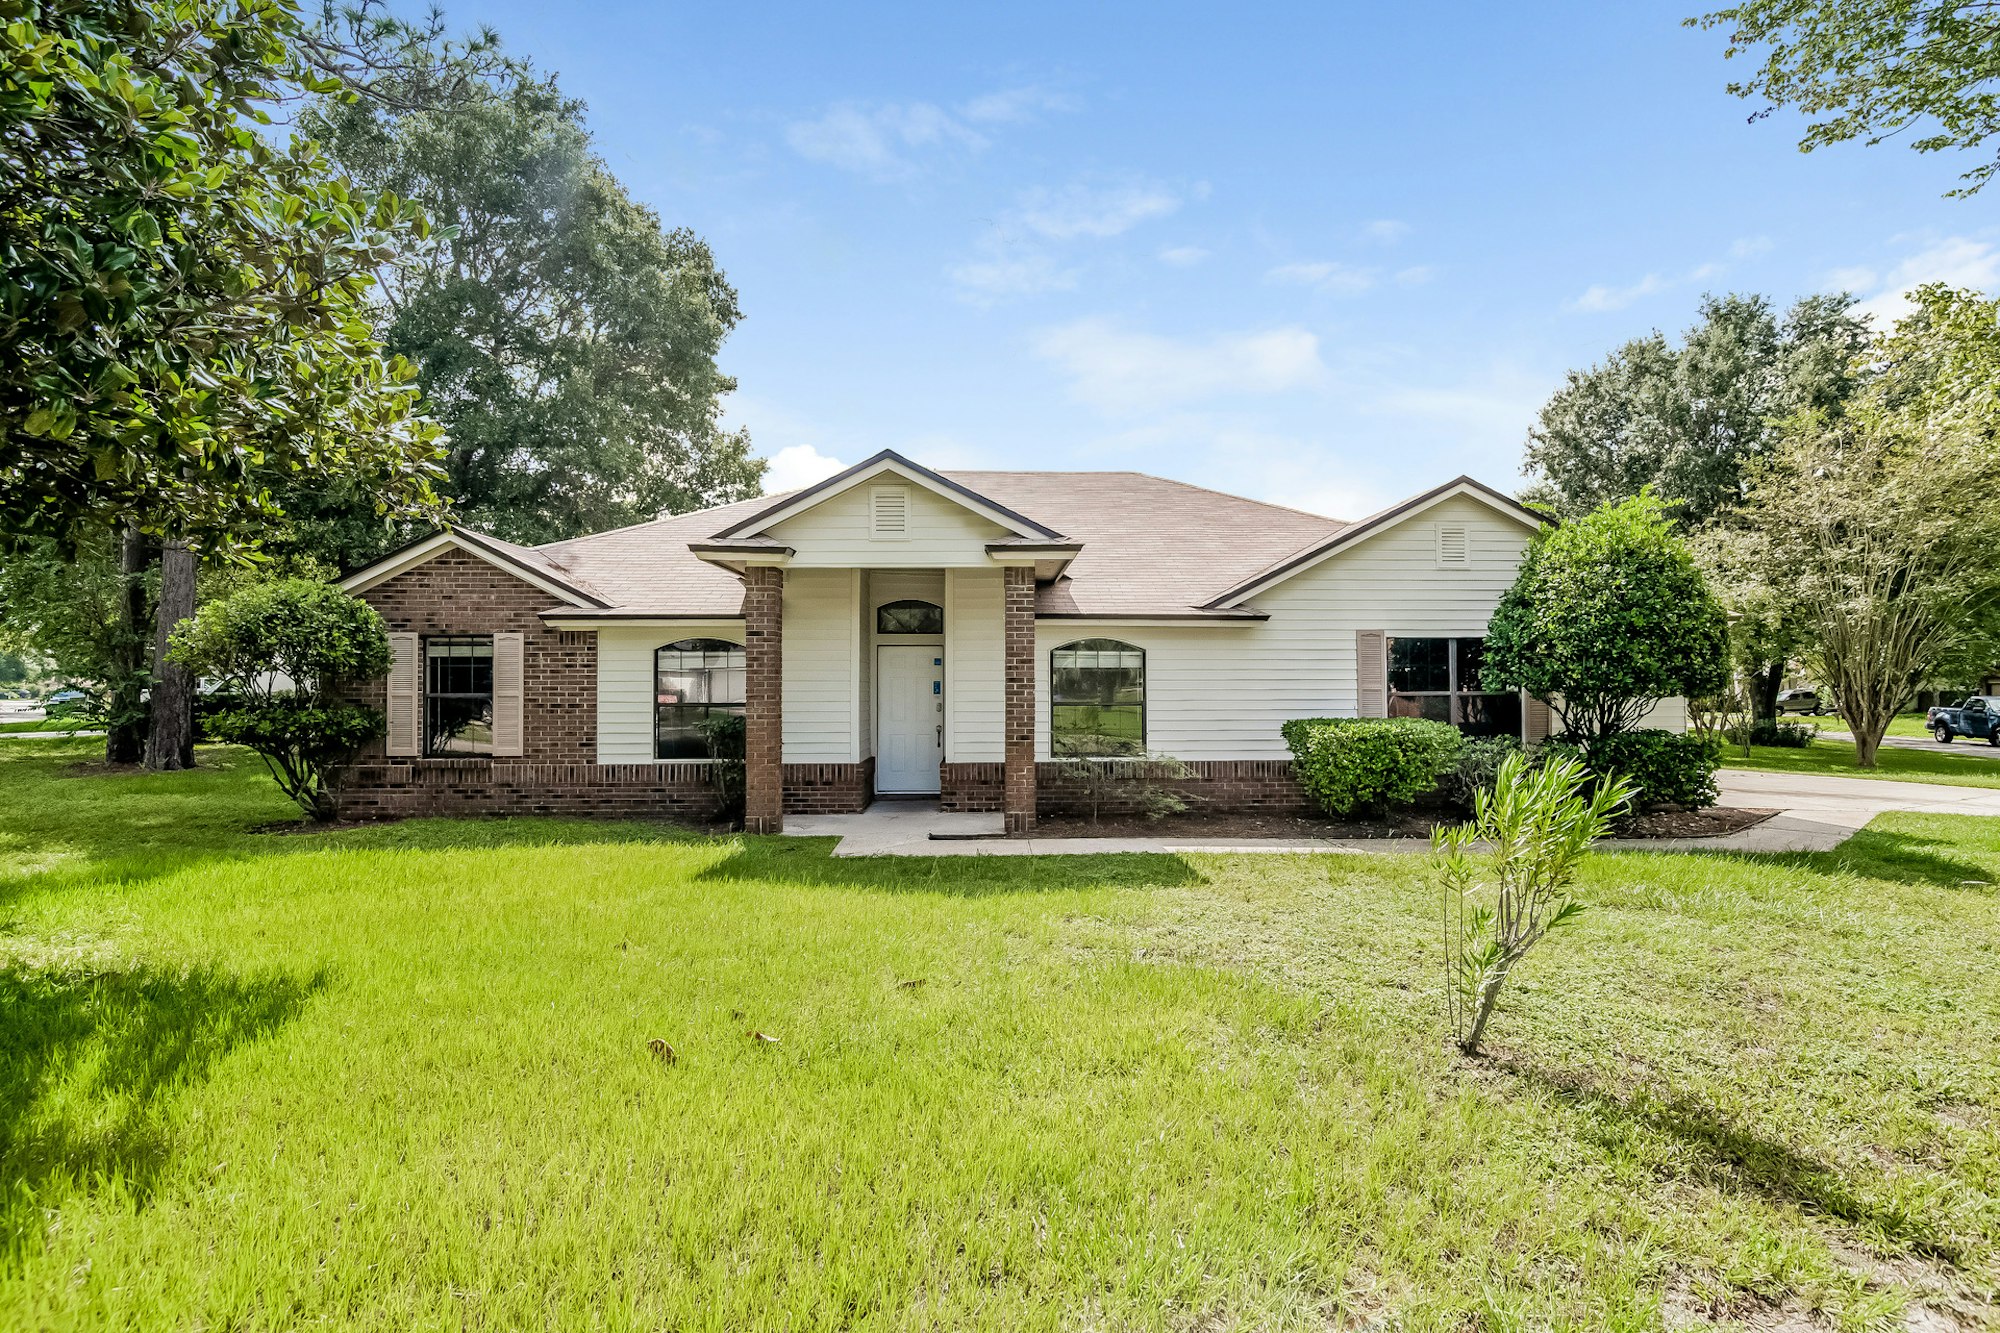 Photo 1 of 25 - 8529 Catsby Ct, Jacksonville, FL 32244